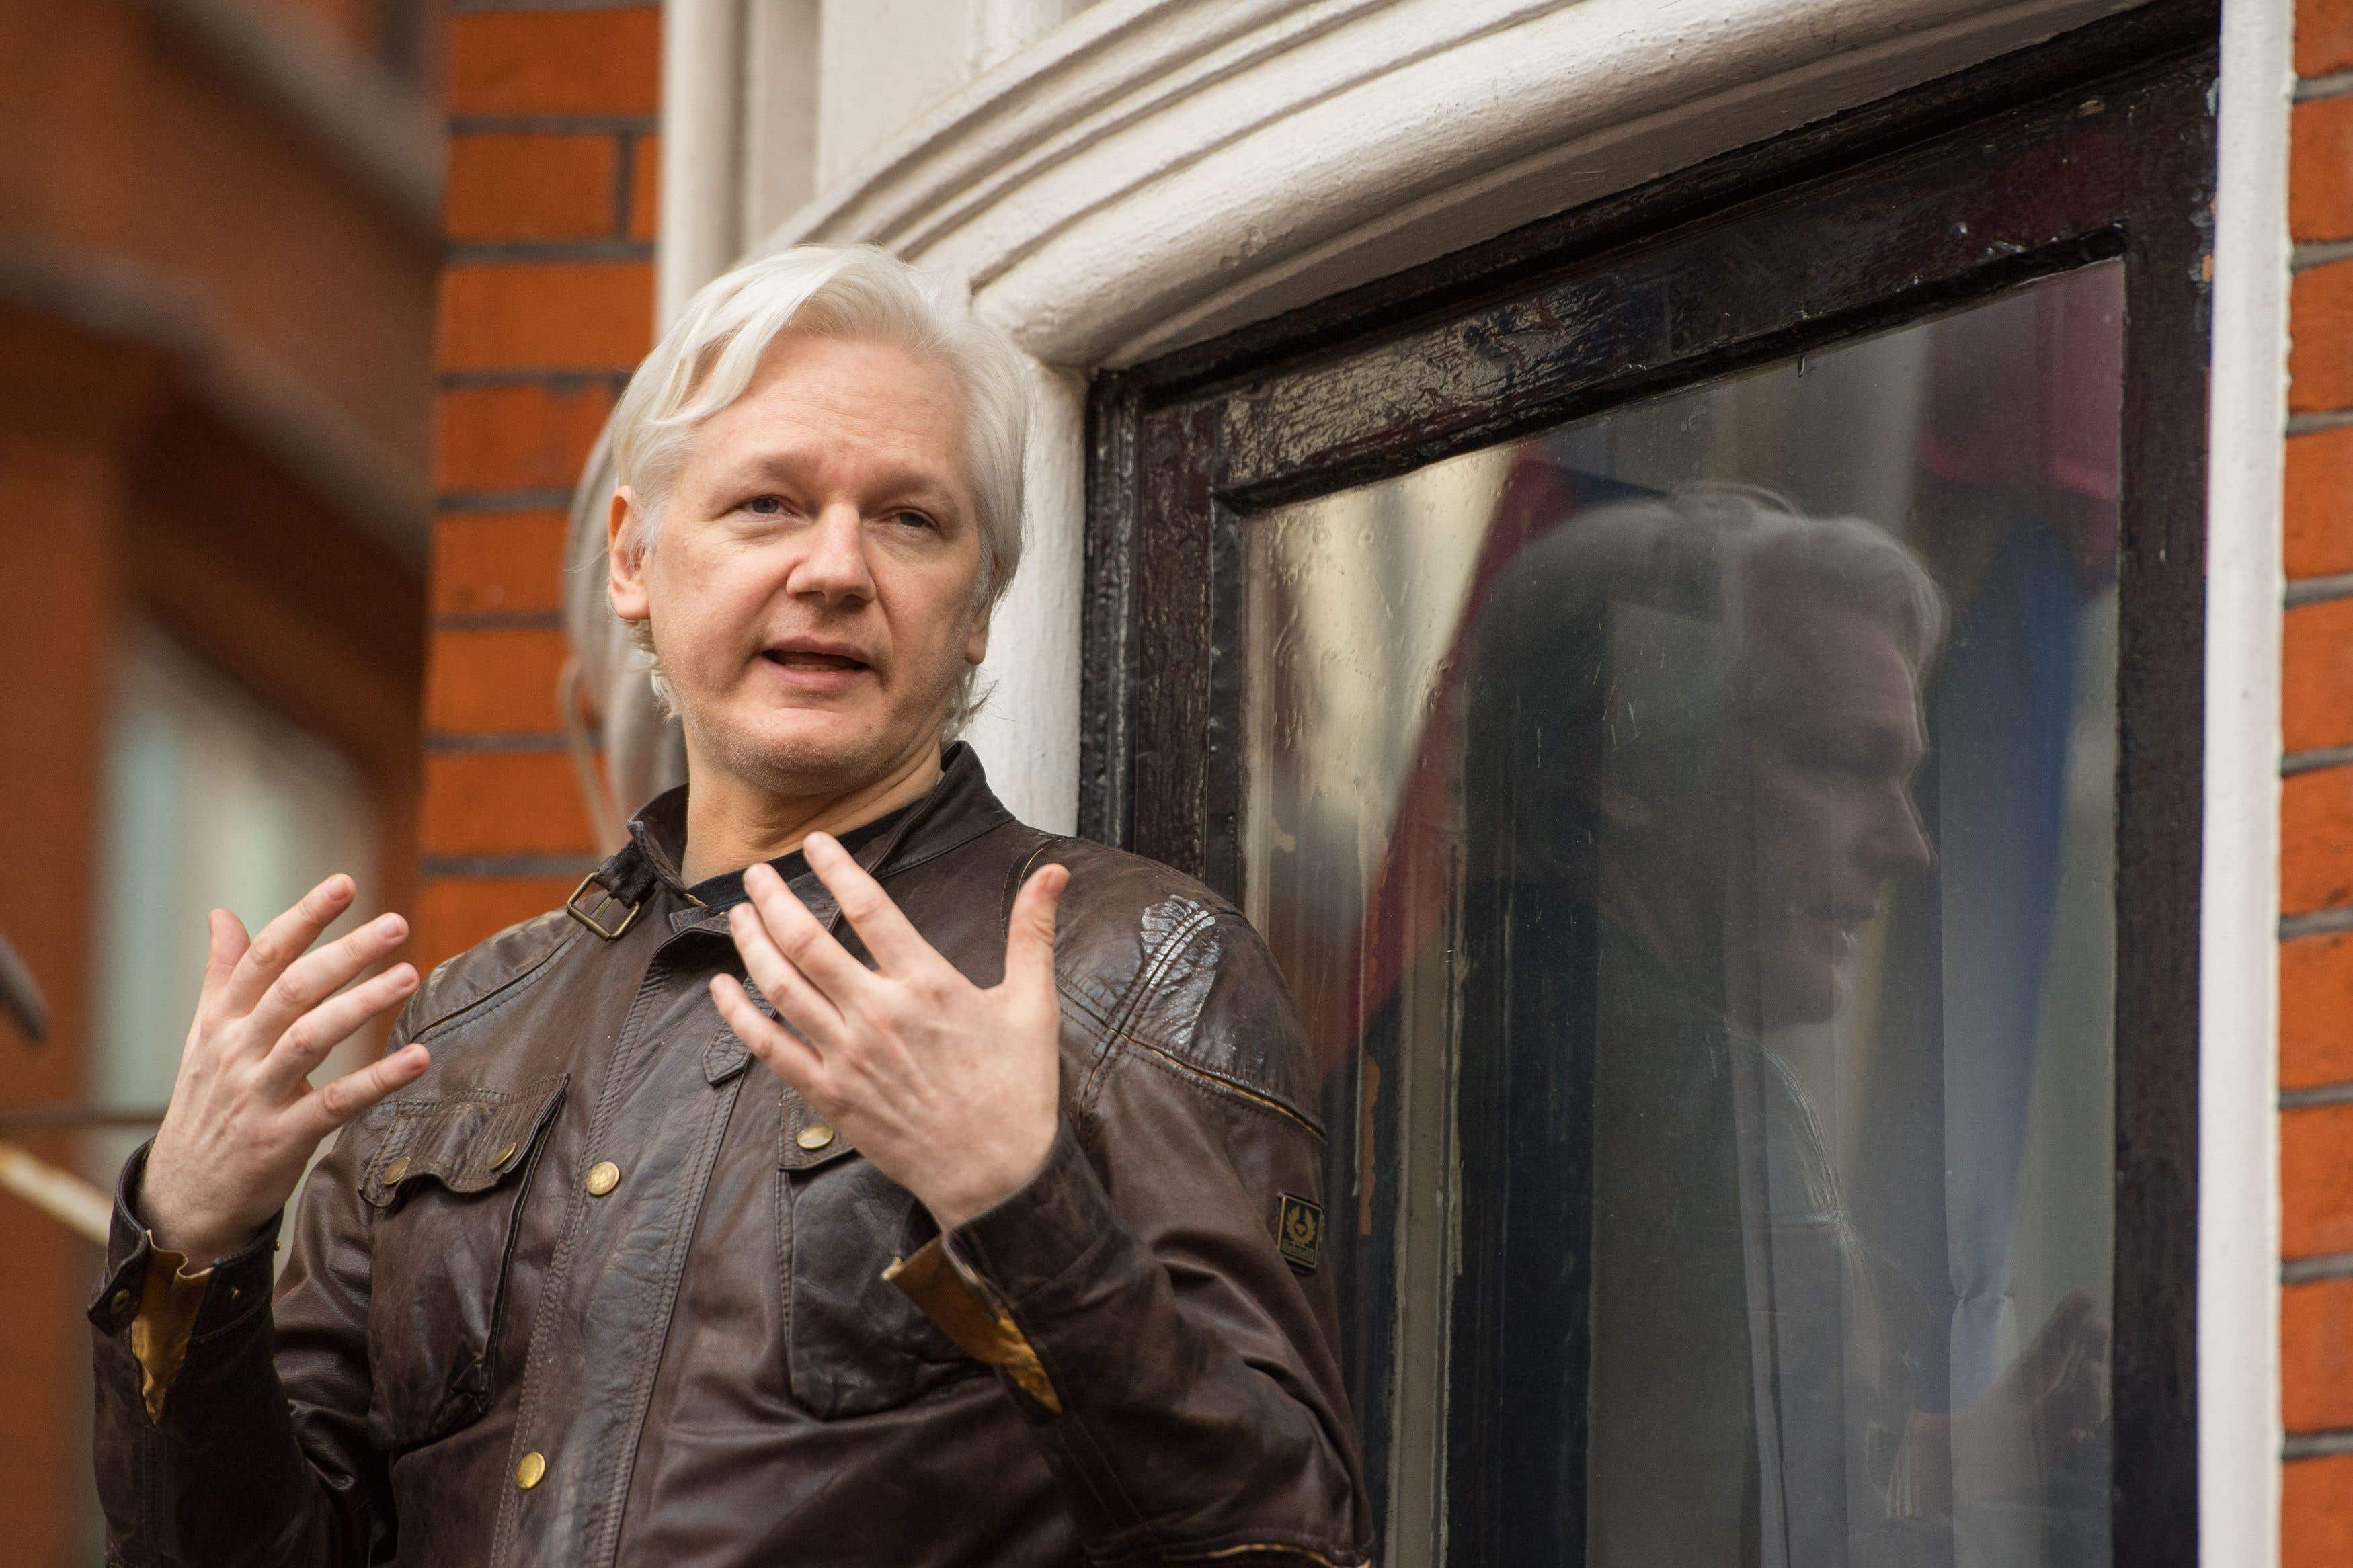 Julian Assange sought refuge in the Ecuadorian embassy in London in 2012 and remained there until 2019, when he was arrested and sent to Belmarsh, where he has been ever since